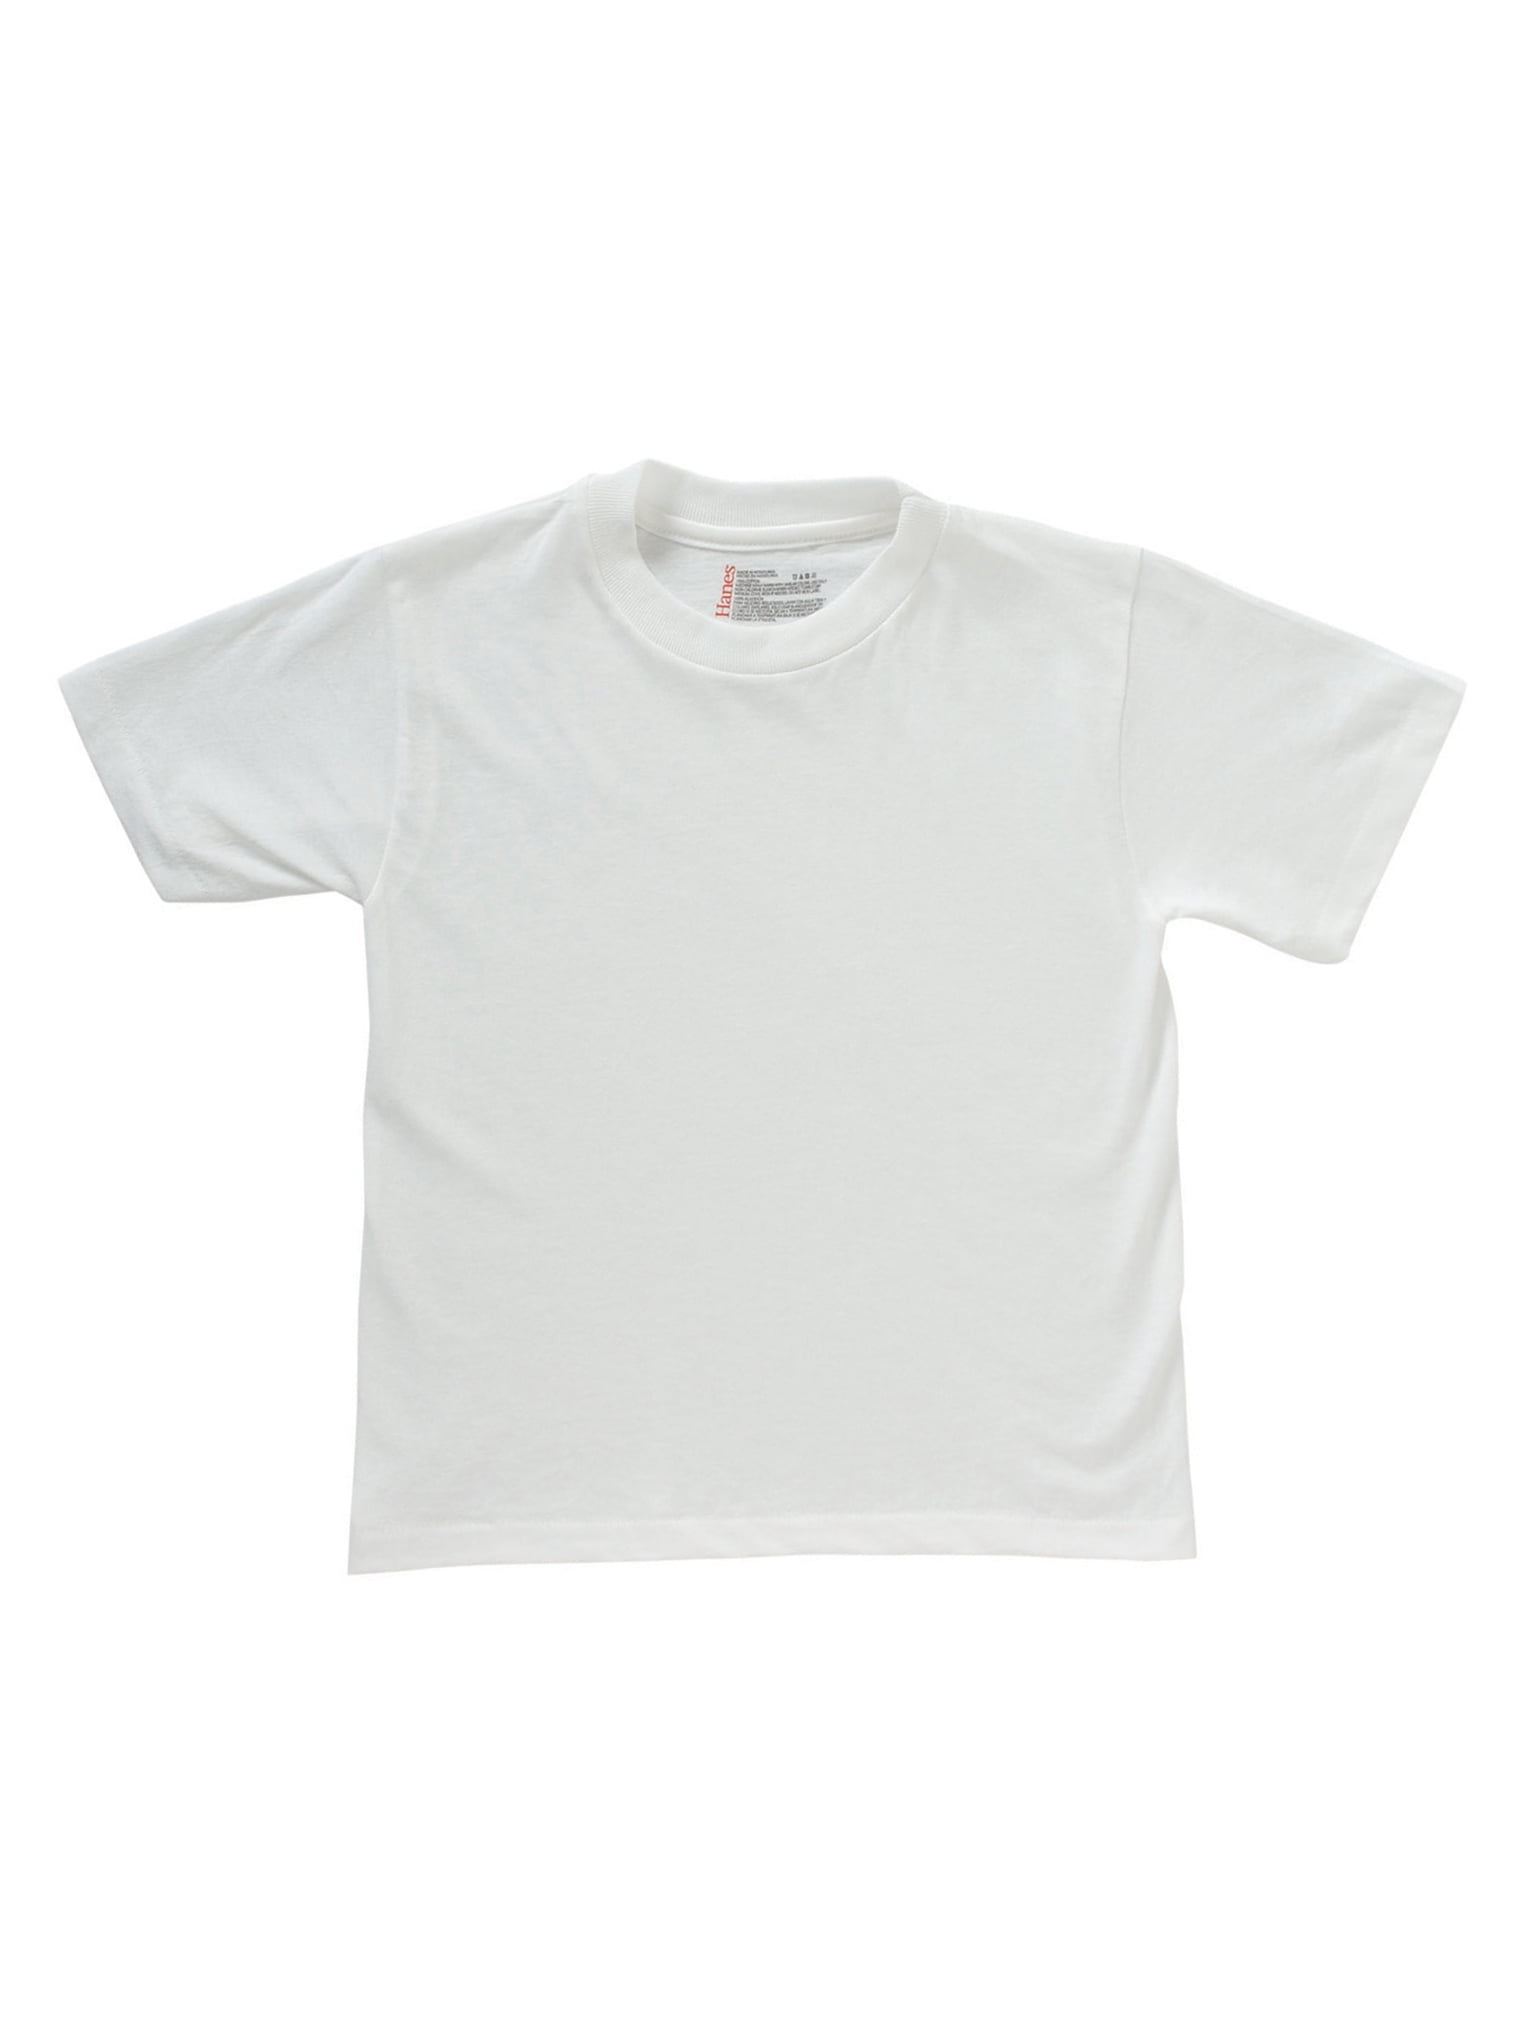 Boy's Size 10 White Crew Neck T-shirts 3-Pack Style 